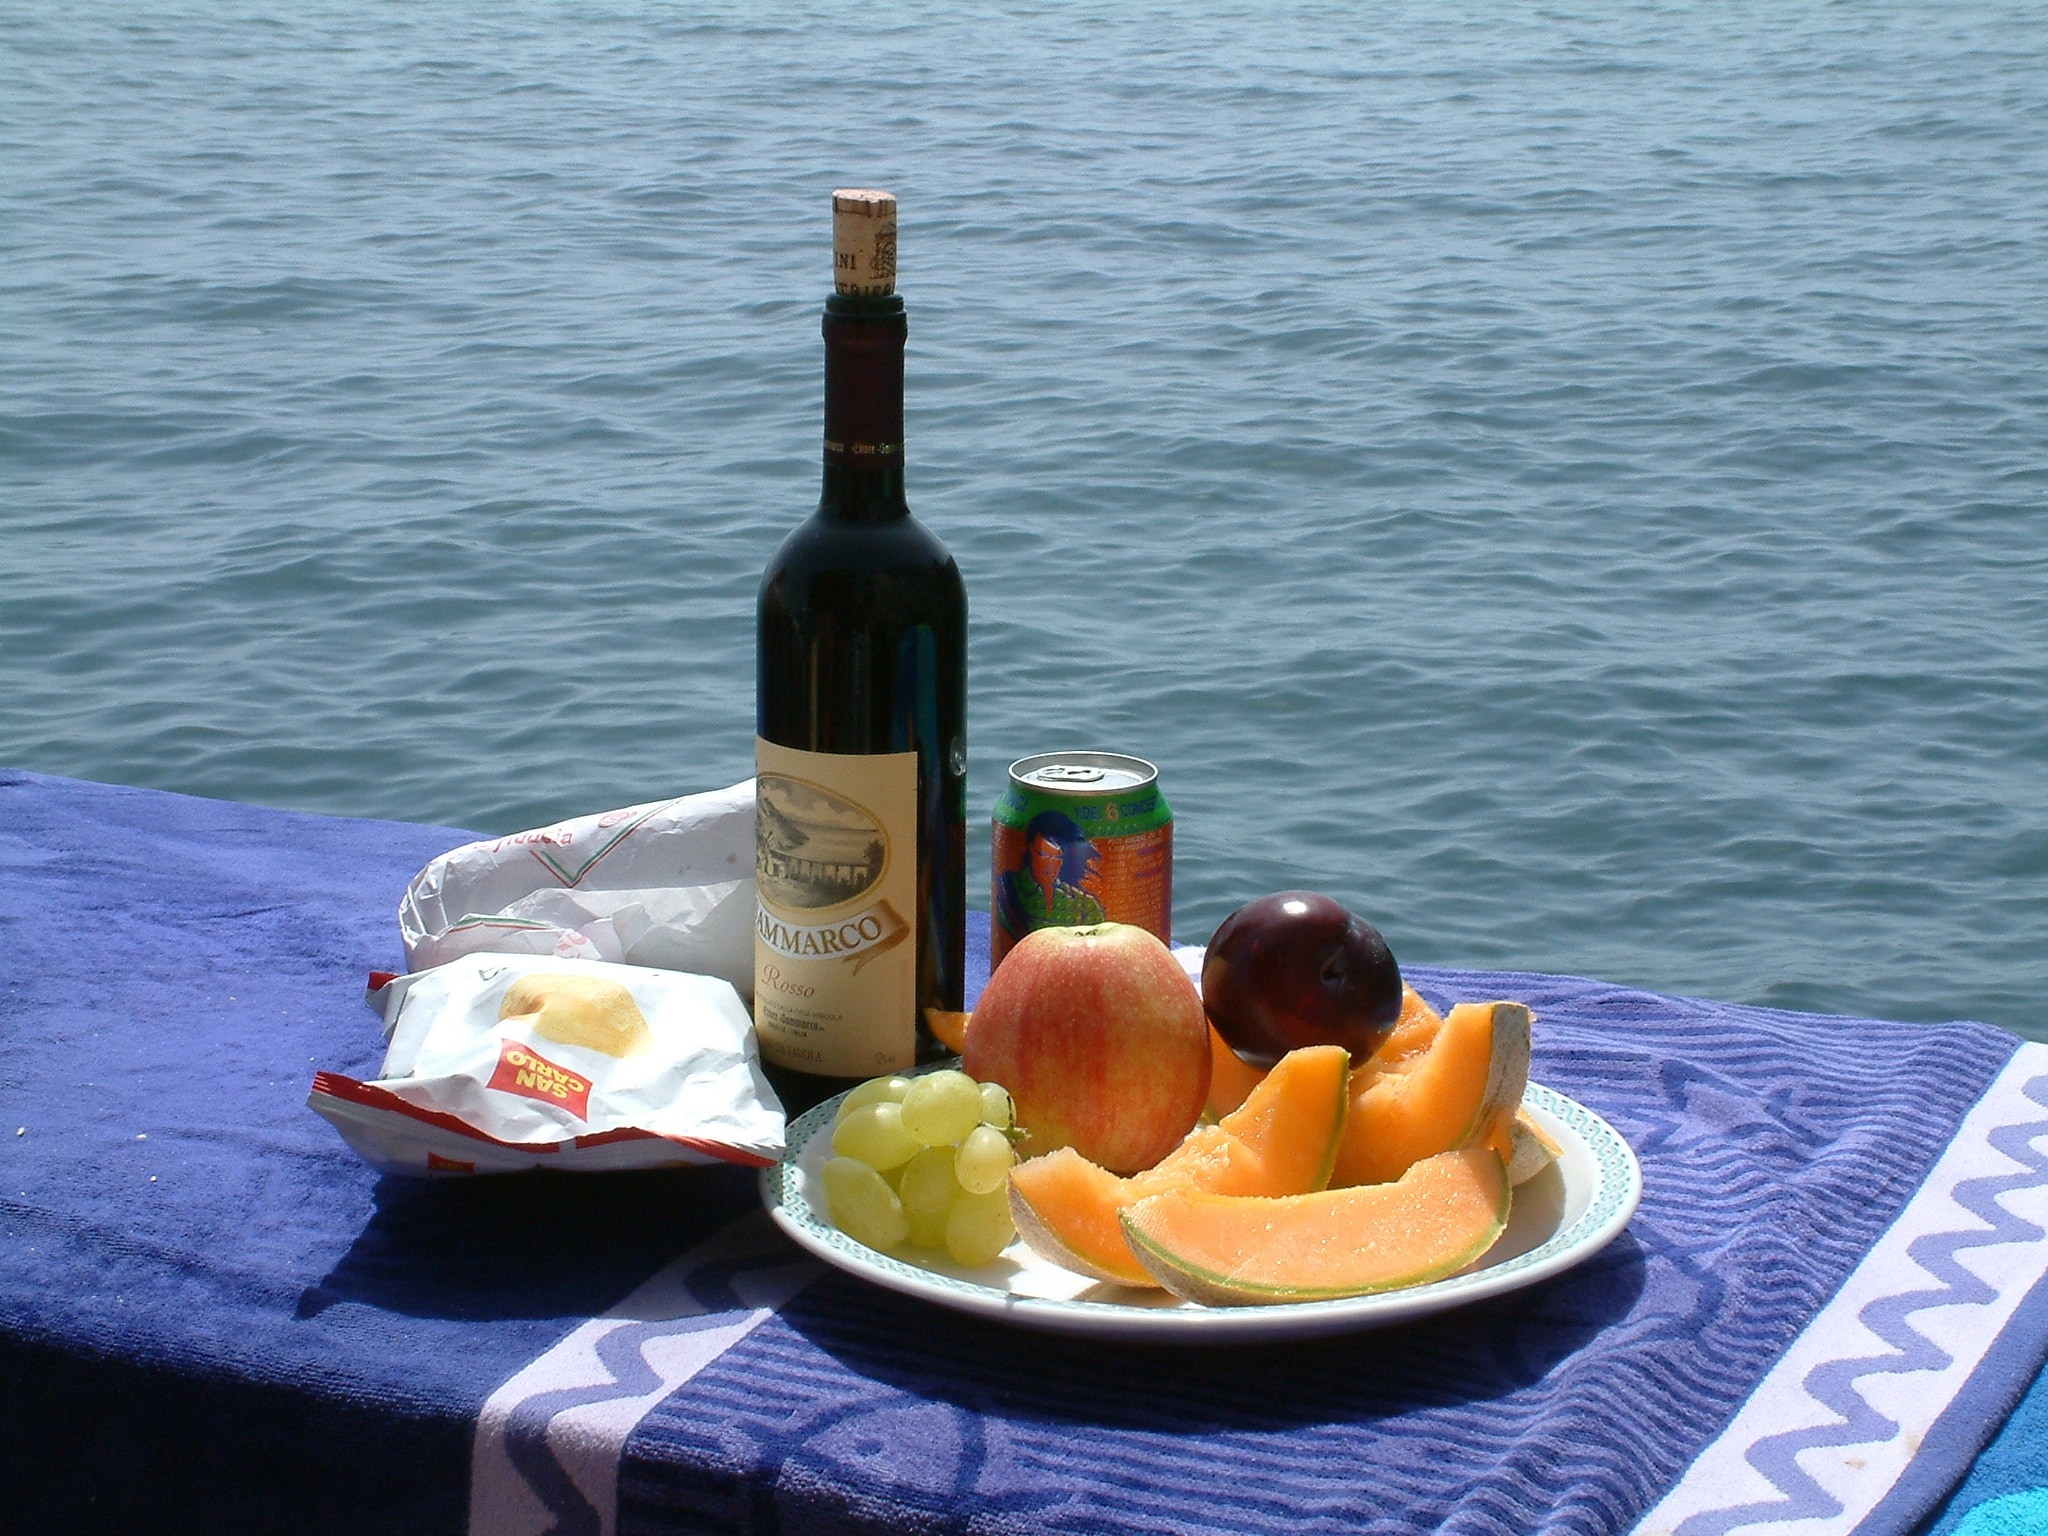 beige labelled wine bottle beside green can, white plastic pack and round white plastic plate with assorted fruits placed on blue and white textile near body of water during daytime